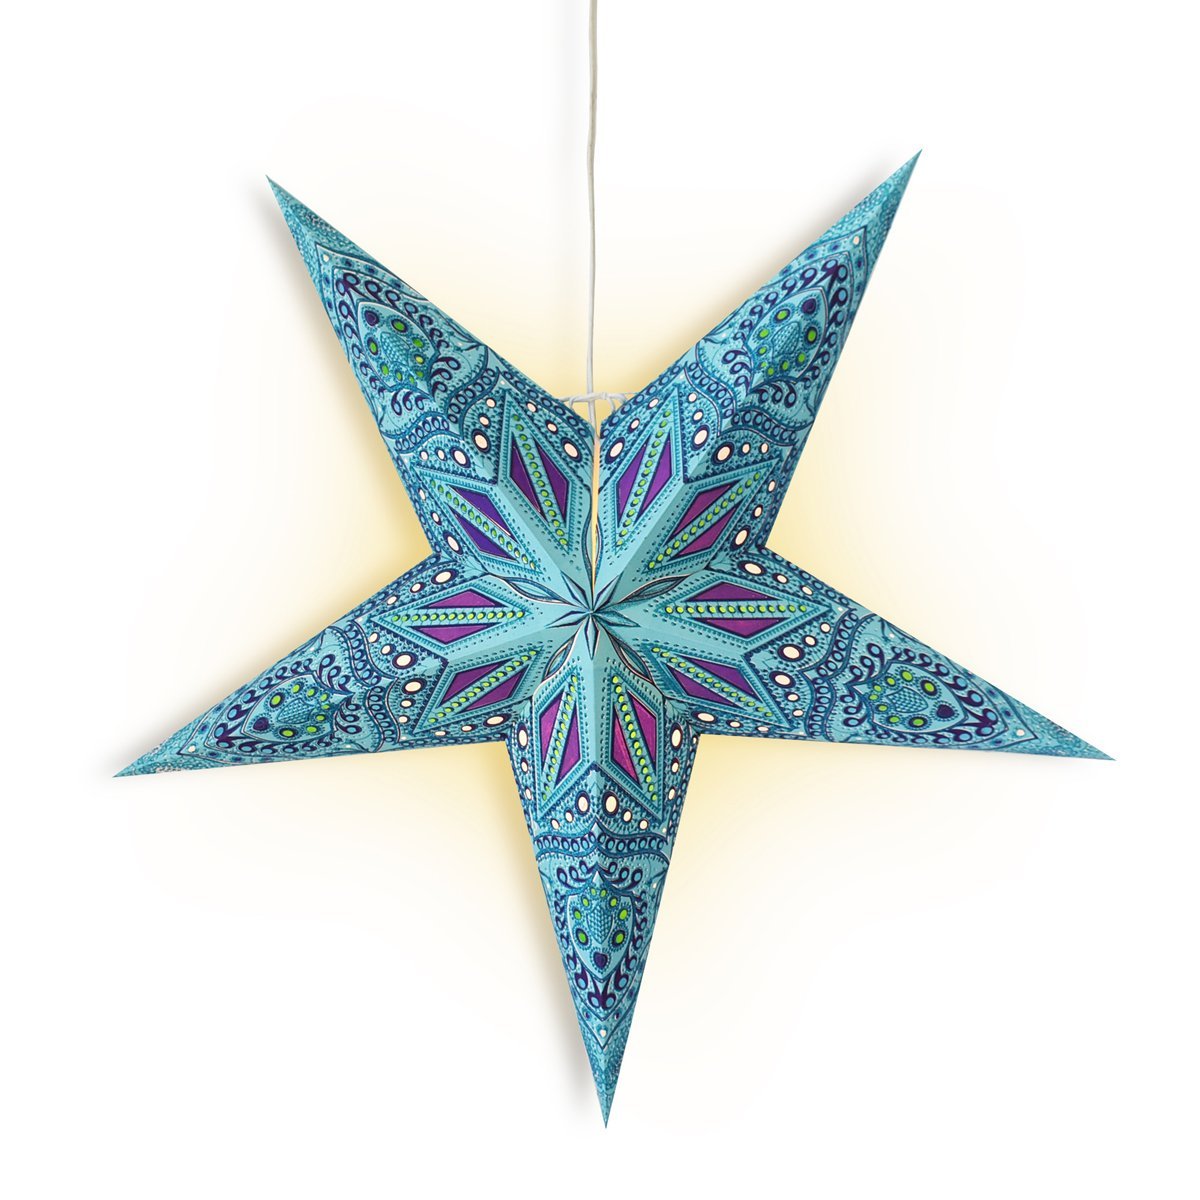 3-PACK + Cord | 24&quot; Turquoise Crystal Glitter Paper Star Lantern and Lamp Cord Hanging Decoration - PaperLanternStore.com - Paper Lanterns, Decor, Party Lights &amp; More